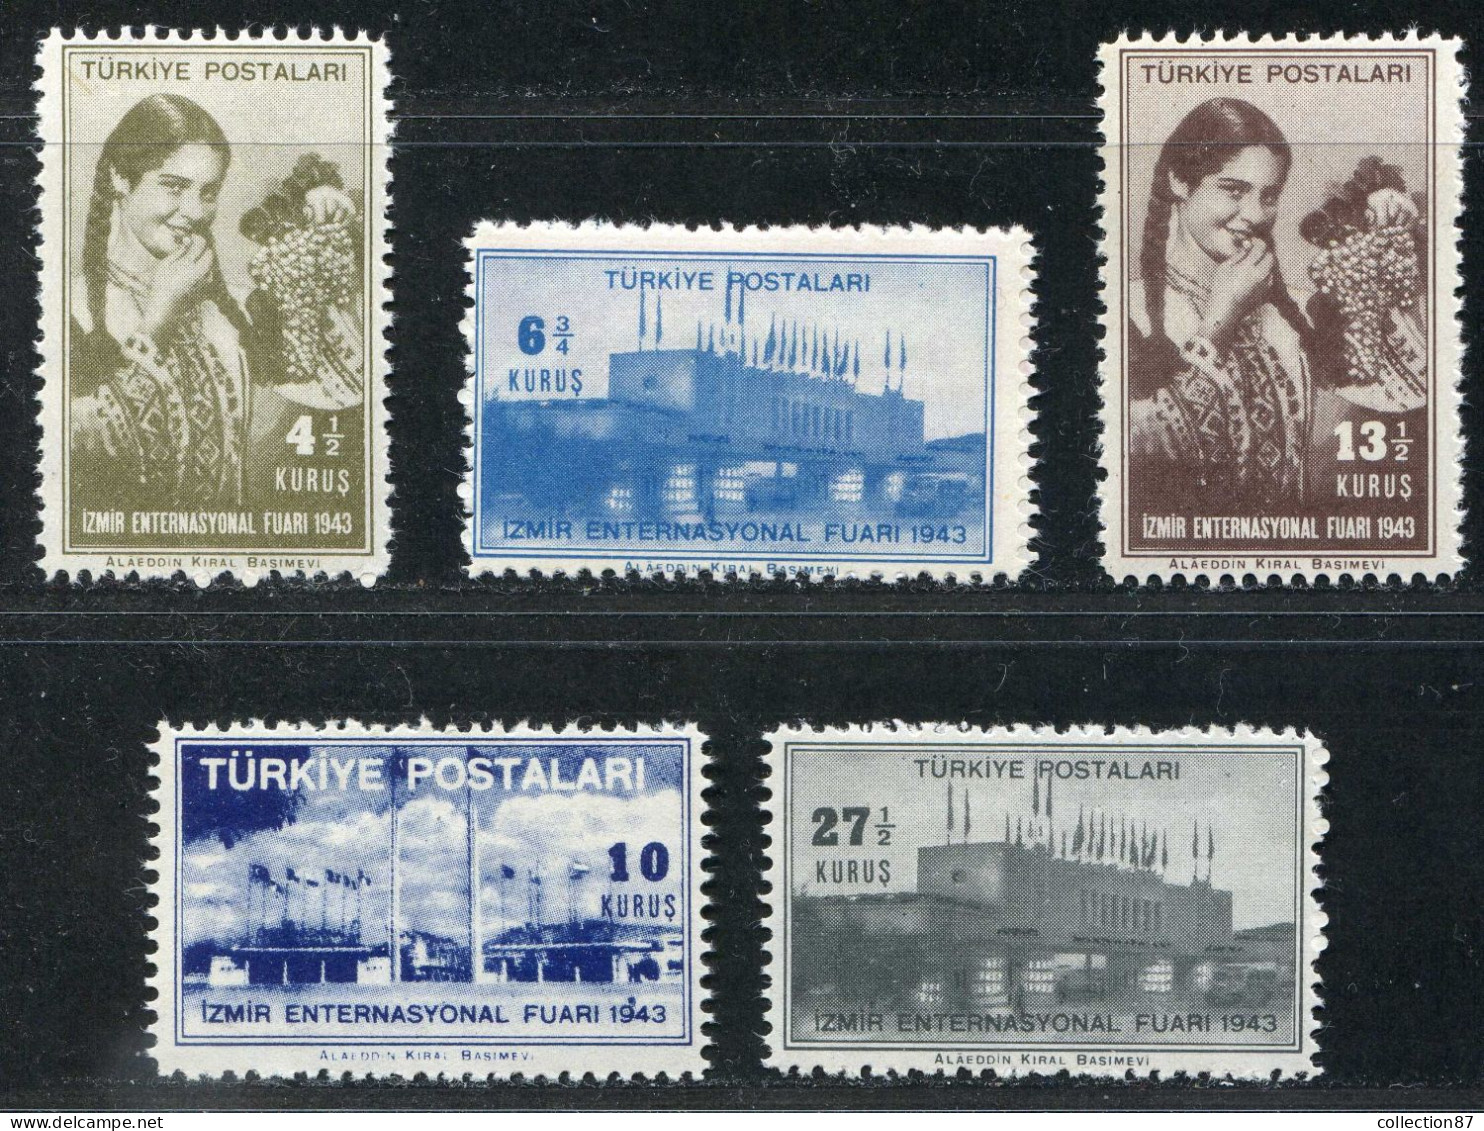 REF 091 > TURQUIE < Yv N° 1014 à 1019 * * < Neuf Luxe Dos Visible MNH * * > Foire Izmir - Neufs